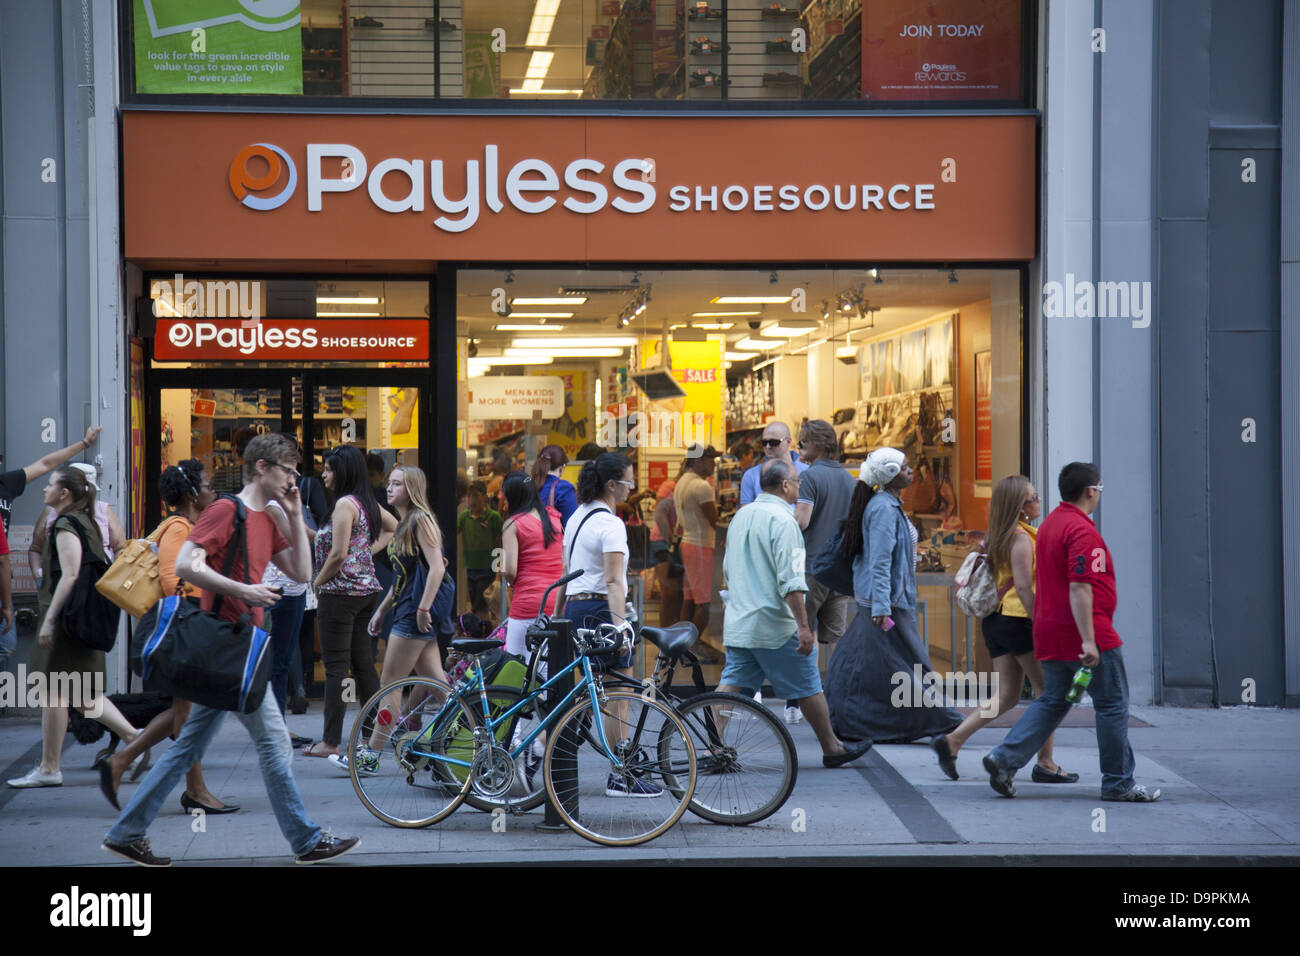 People walk by Payless Shoes, a brand name to attract people watching their spending especially in economically tight times. Stock Photo